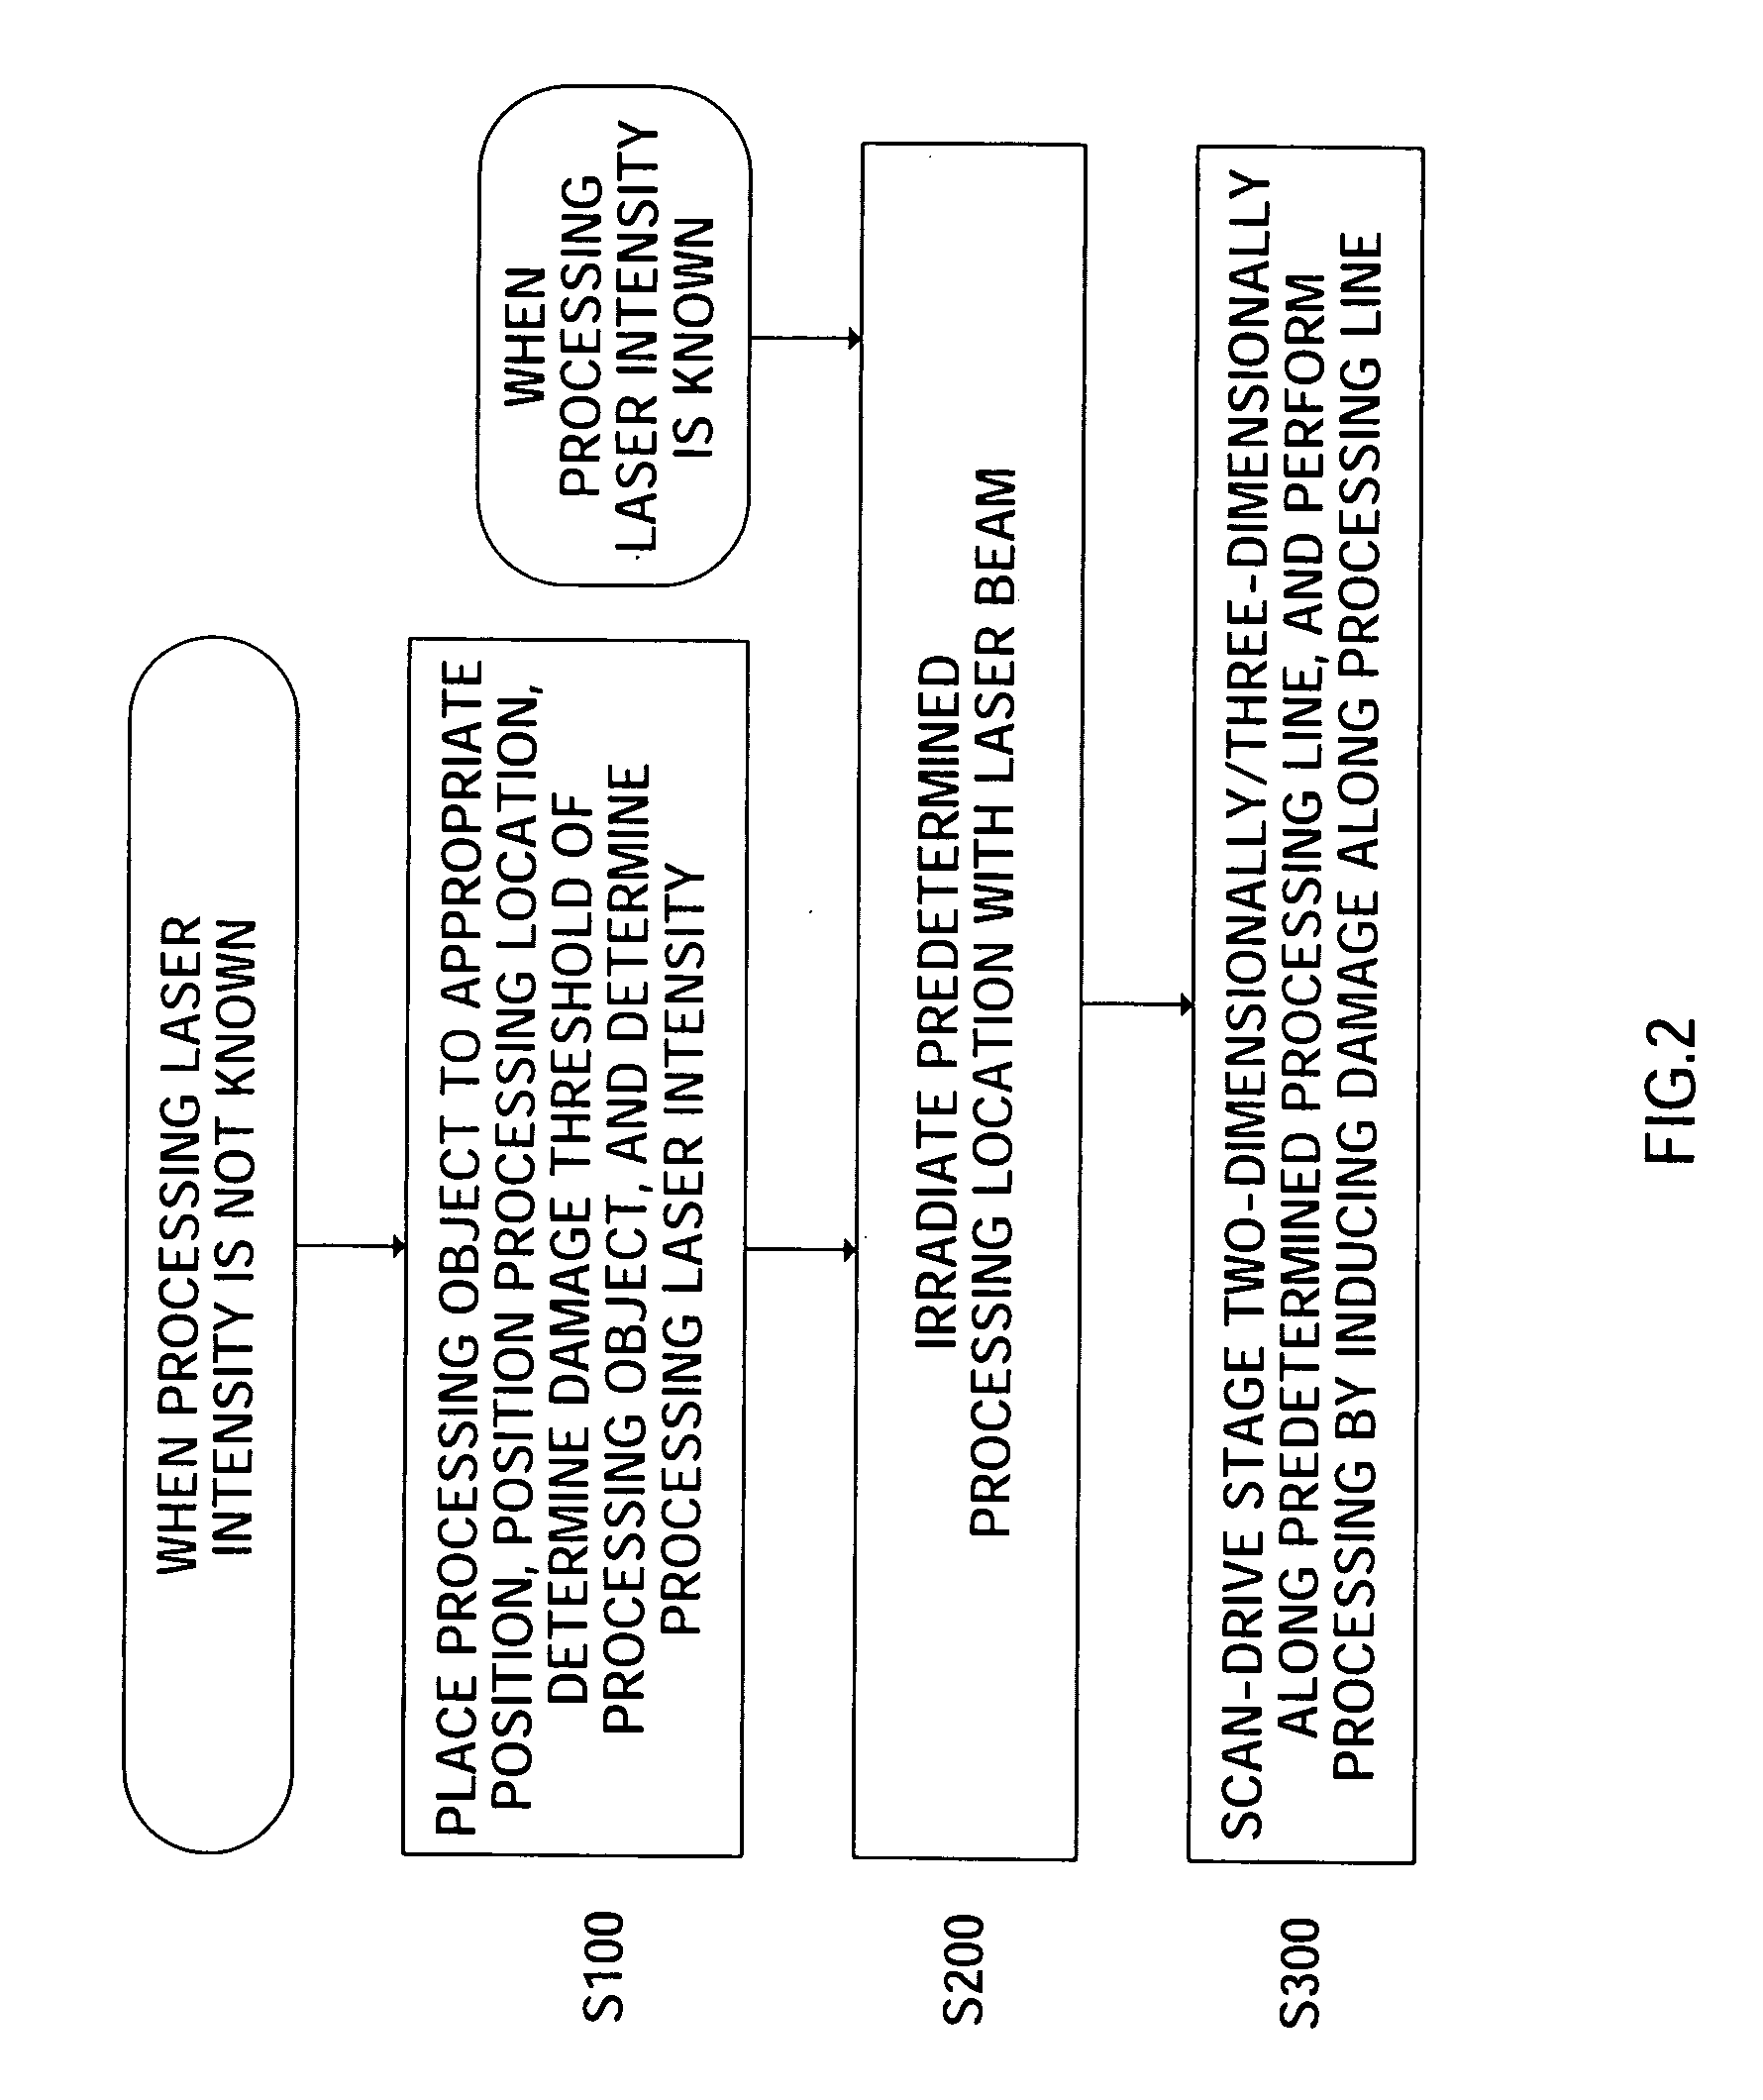 Laser Processing Method and Equipment